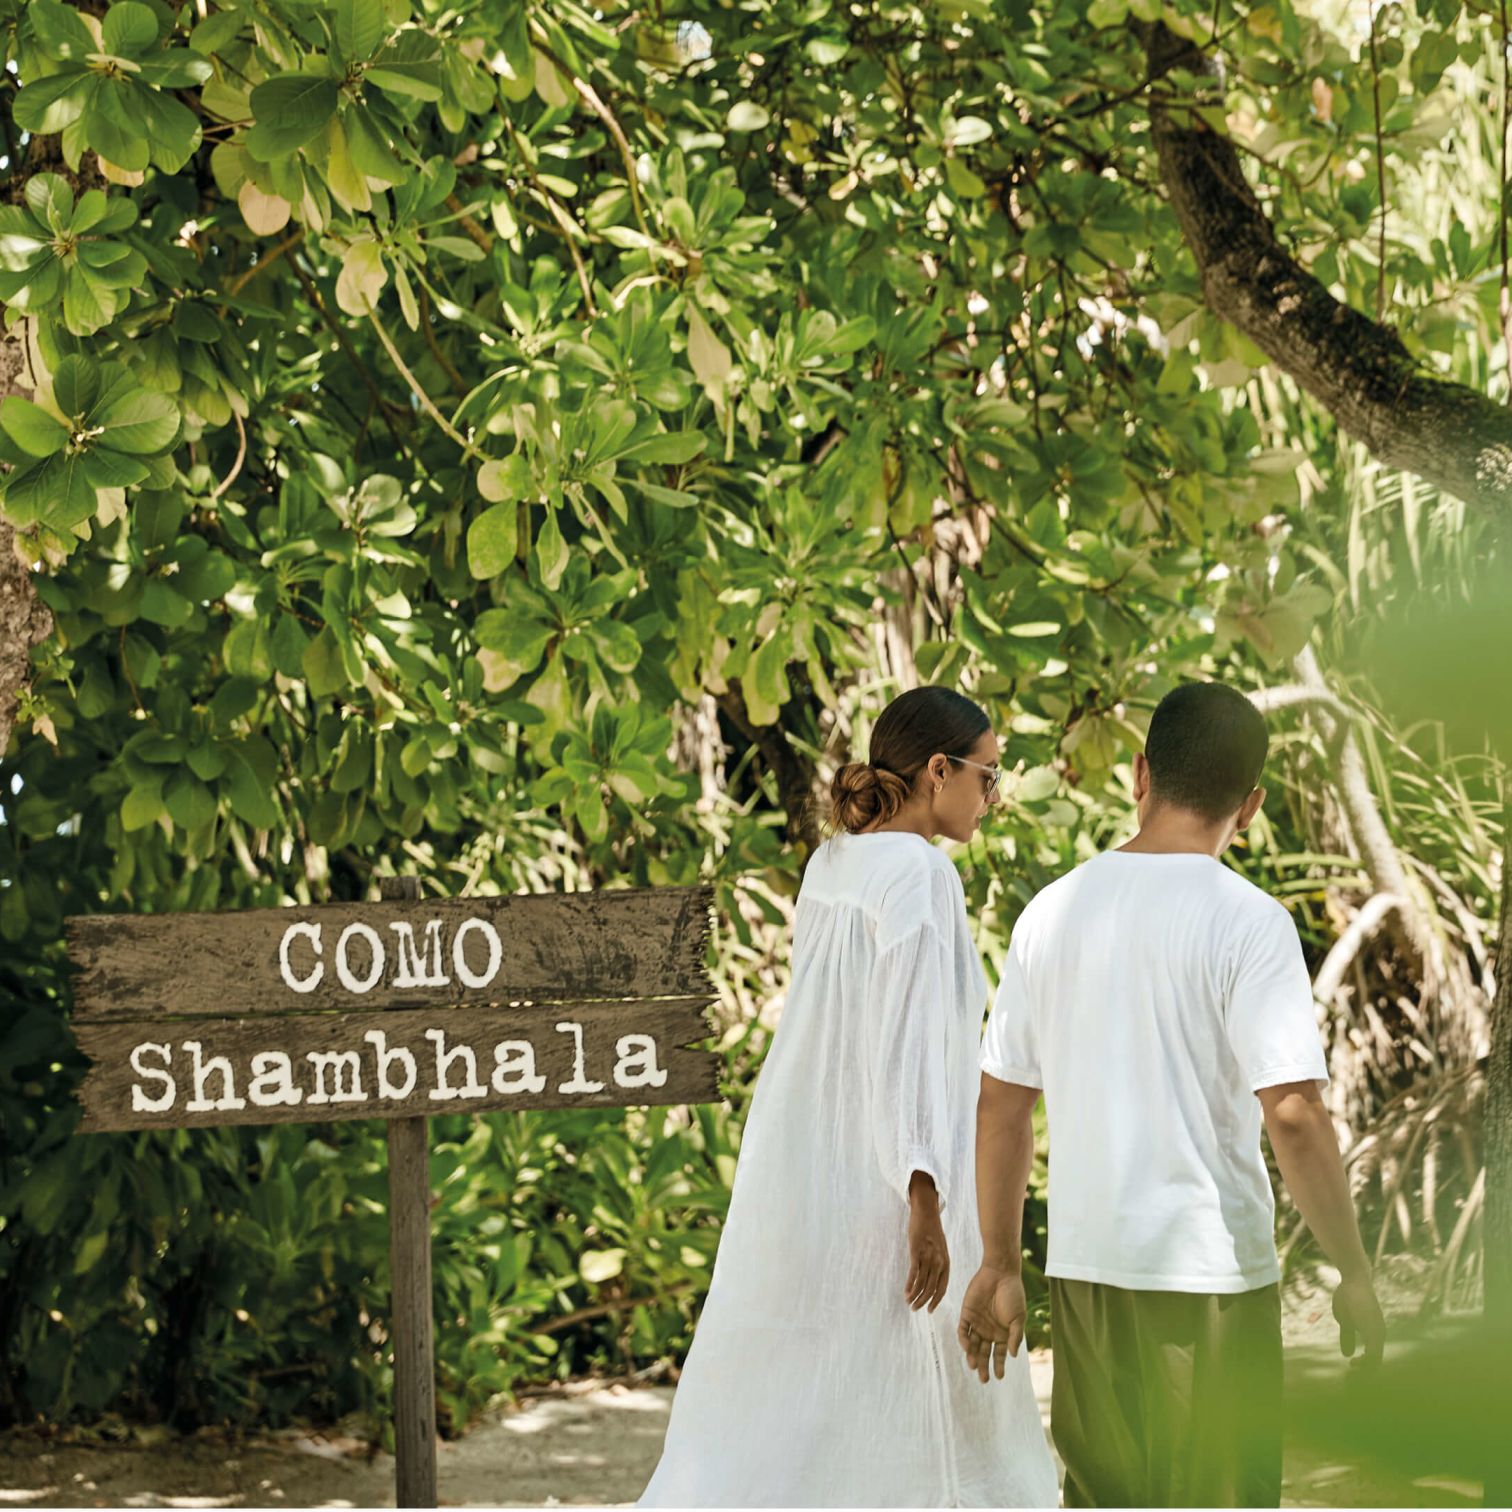 A Man And Woman Walking Down A Path With A Sign And Trees